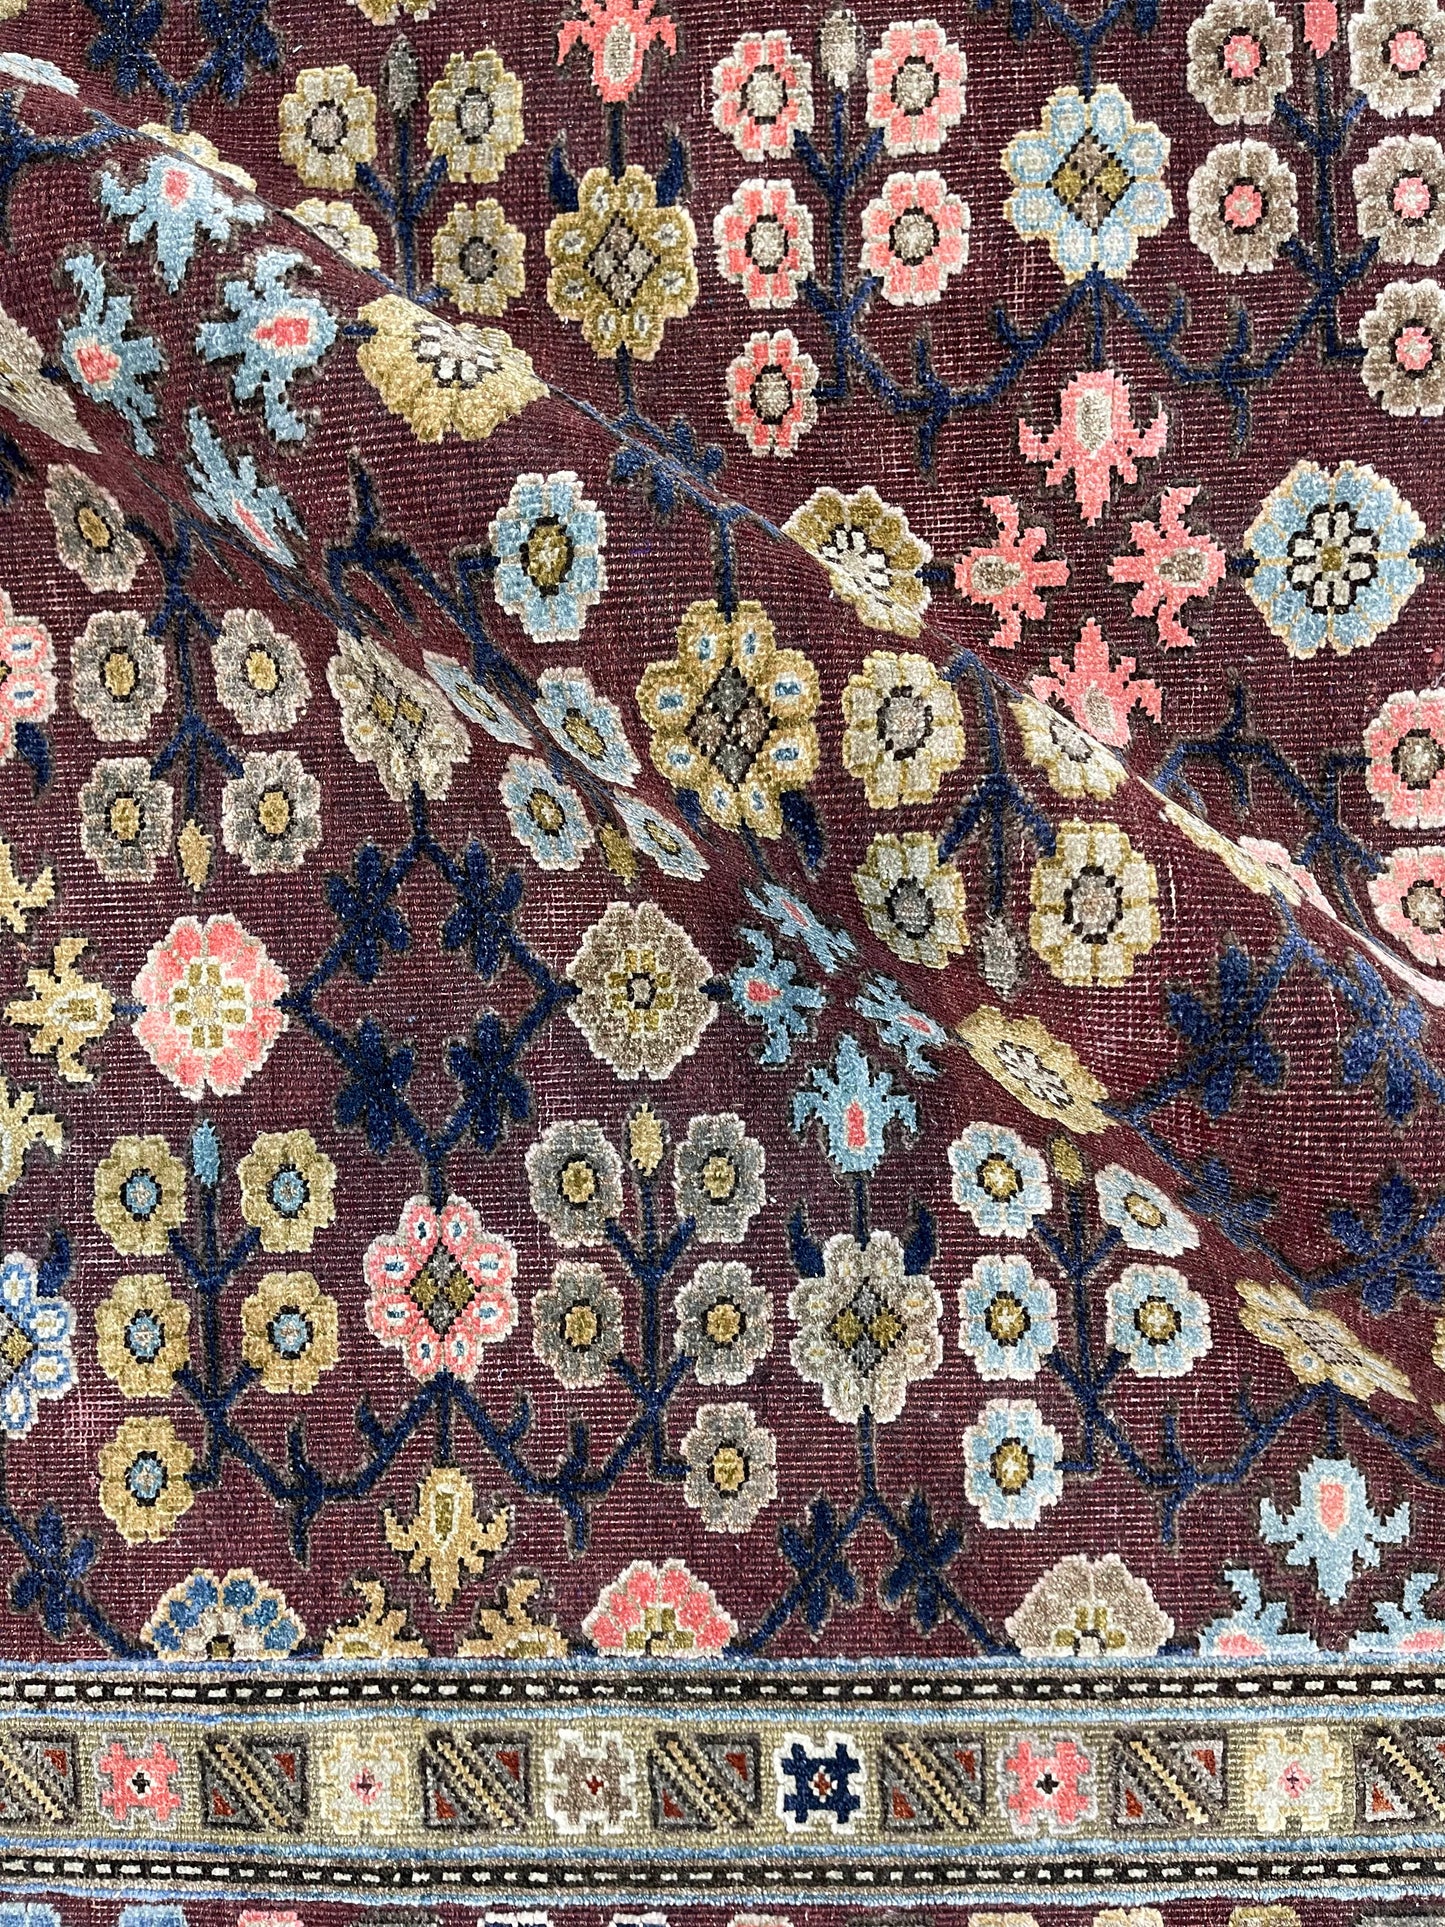 Get trendy with Red and Multy Silk Wool Handknotted Area Rug 5.11x9.2ft 180x279Cms - Traditional Rugs available at Jaipur Oriental Rugs. Grab yours for $2930.00 today!